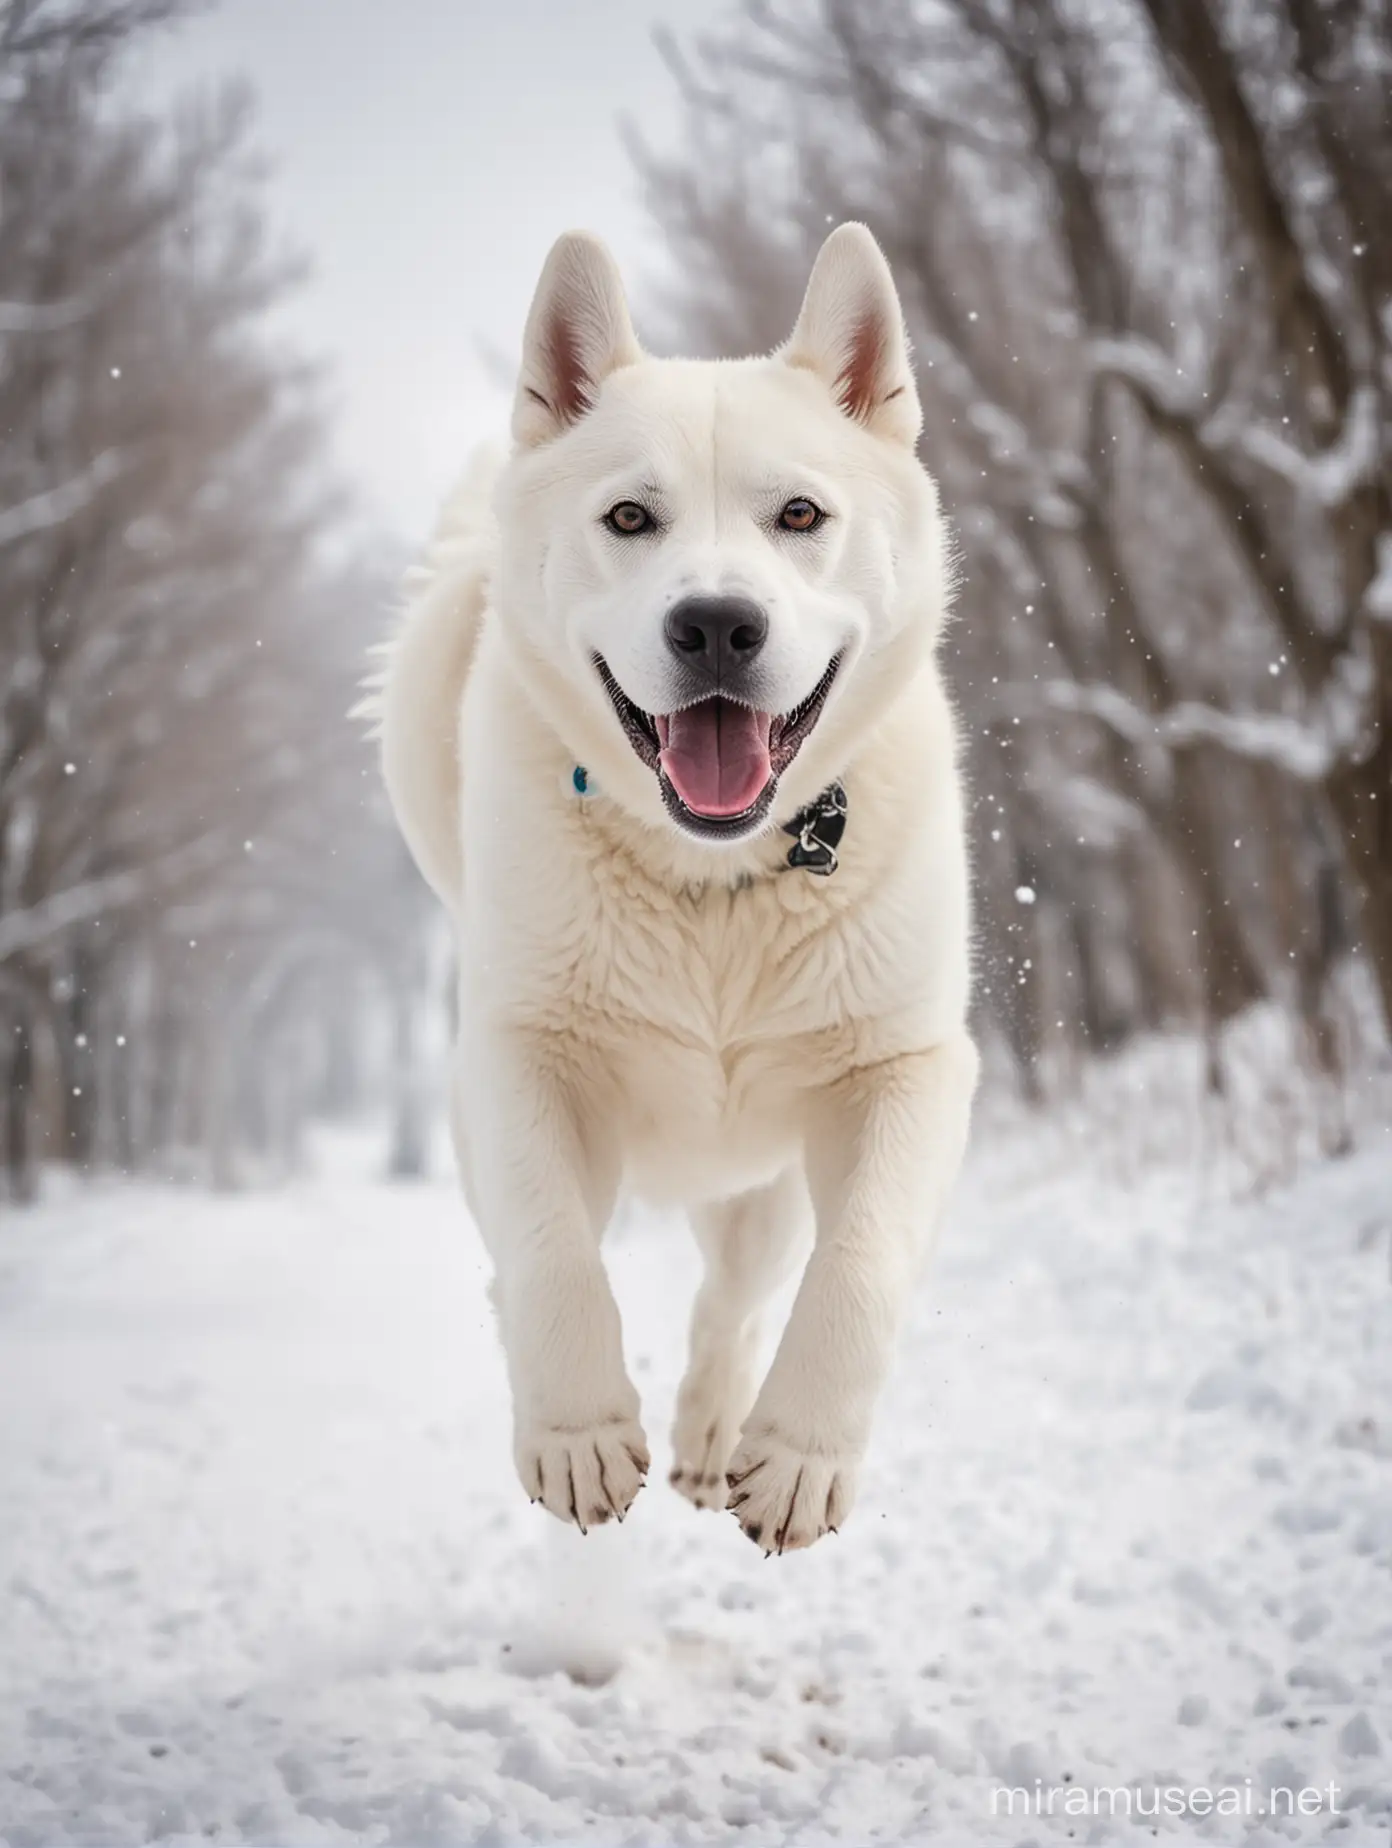 HAPPY DOGO JUMPING THE BREED IS HUSKY WHITE,   THE LANSdCAPE IS SNOW, blurry
